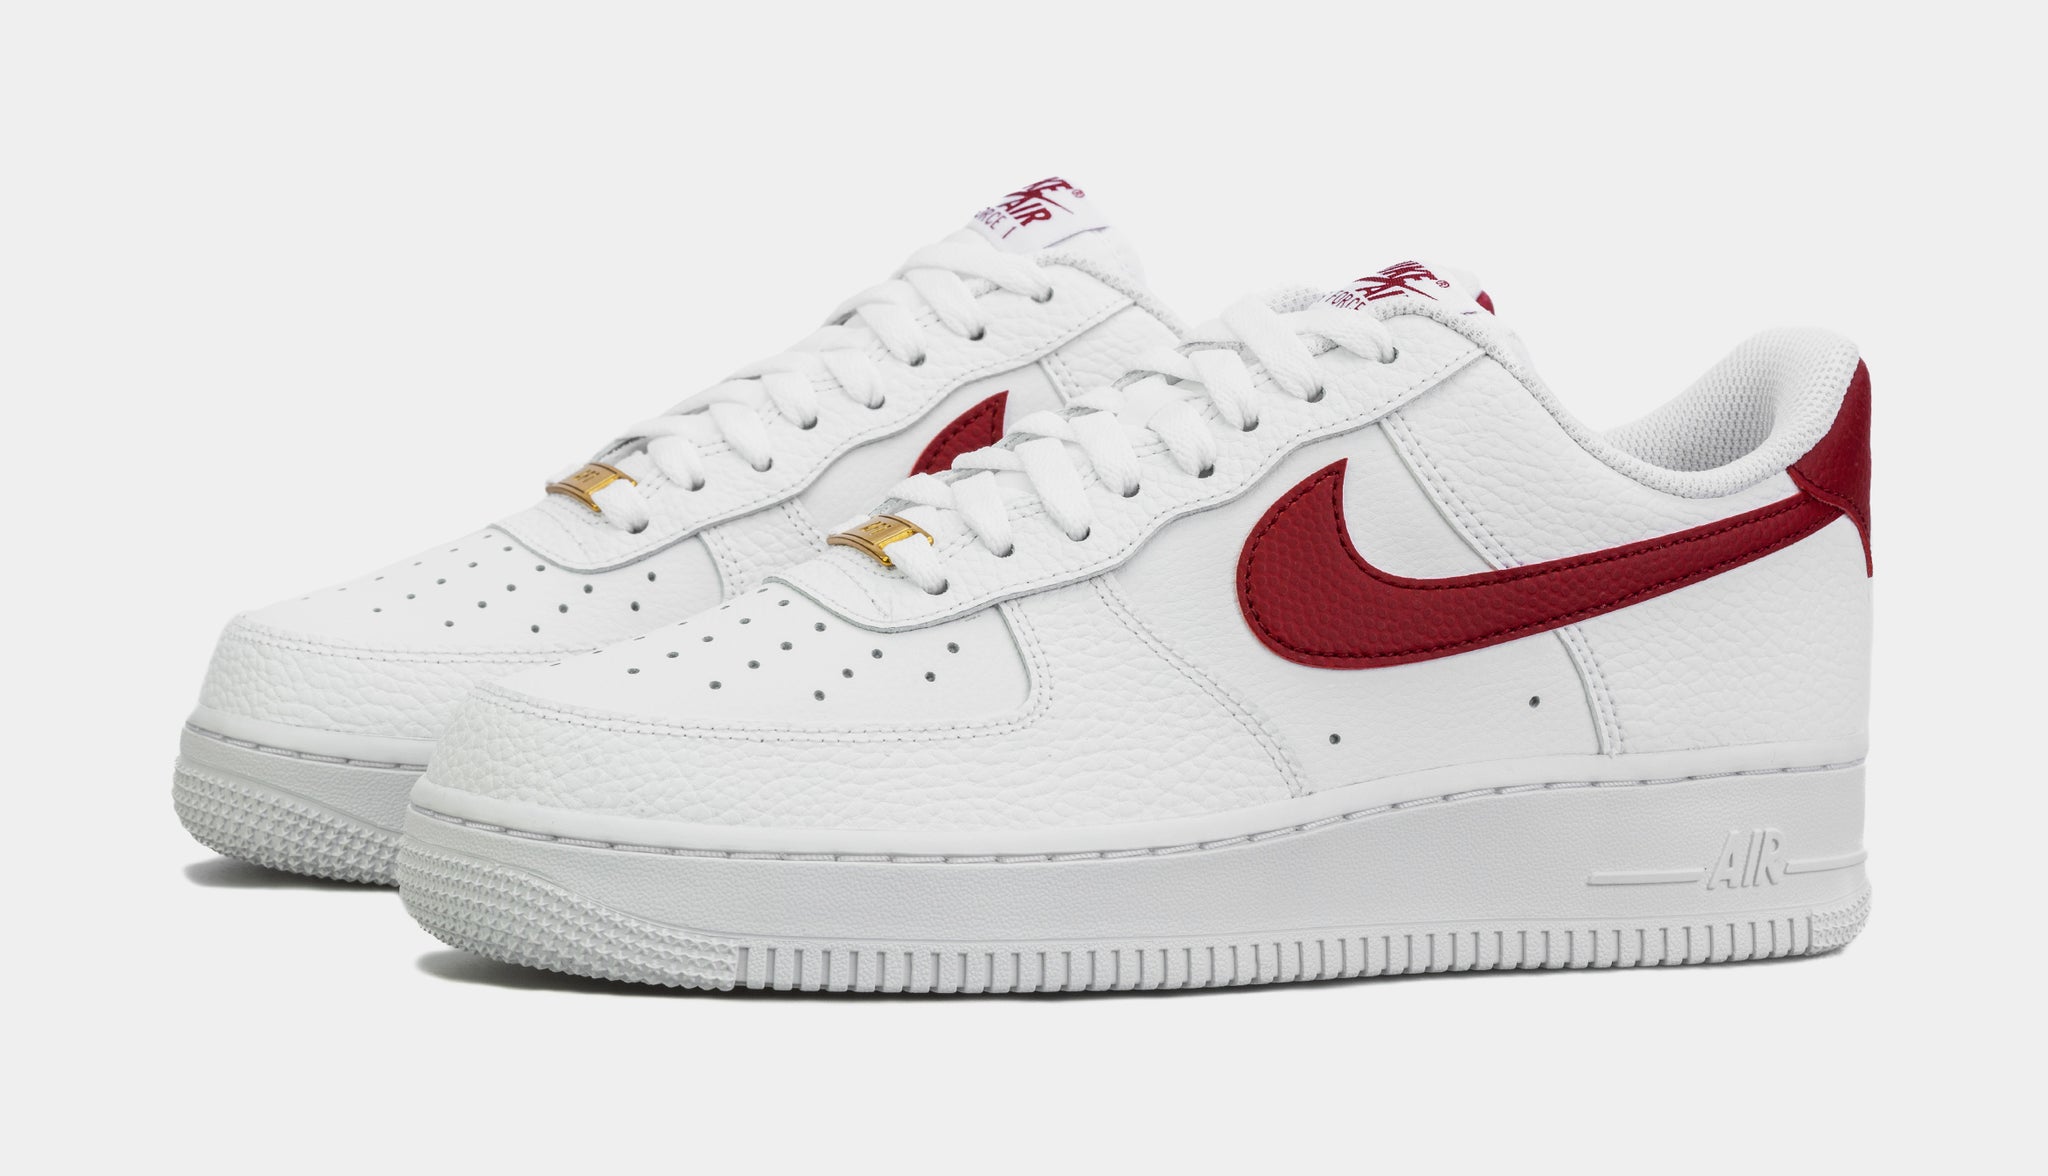 inschakelen Pijnboom aardappel Nike Air Force 1 07 Mens Lifestyle Shoes White Red CZ0326-100 – Shoe Palace